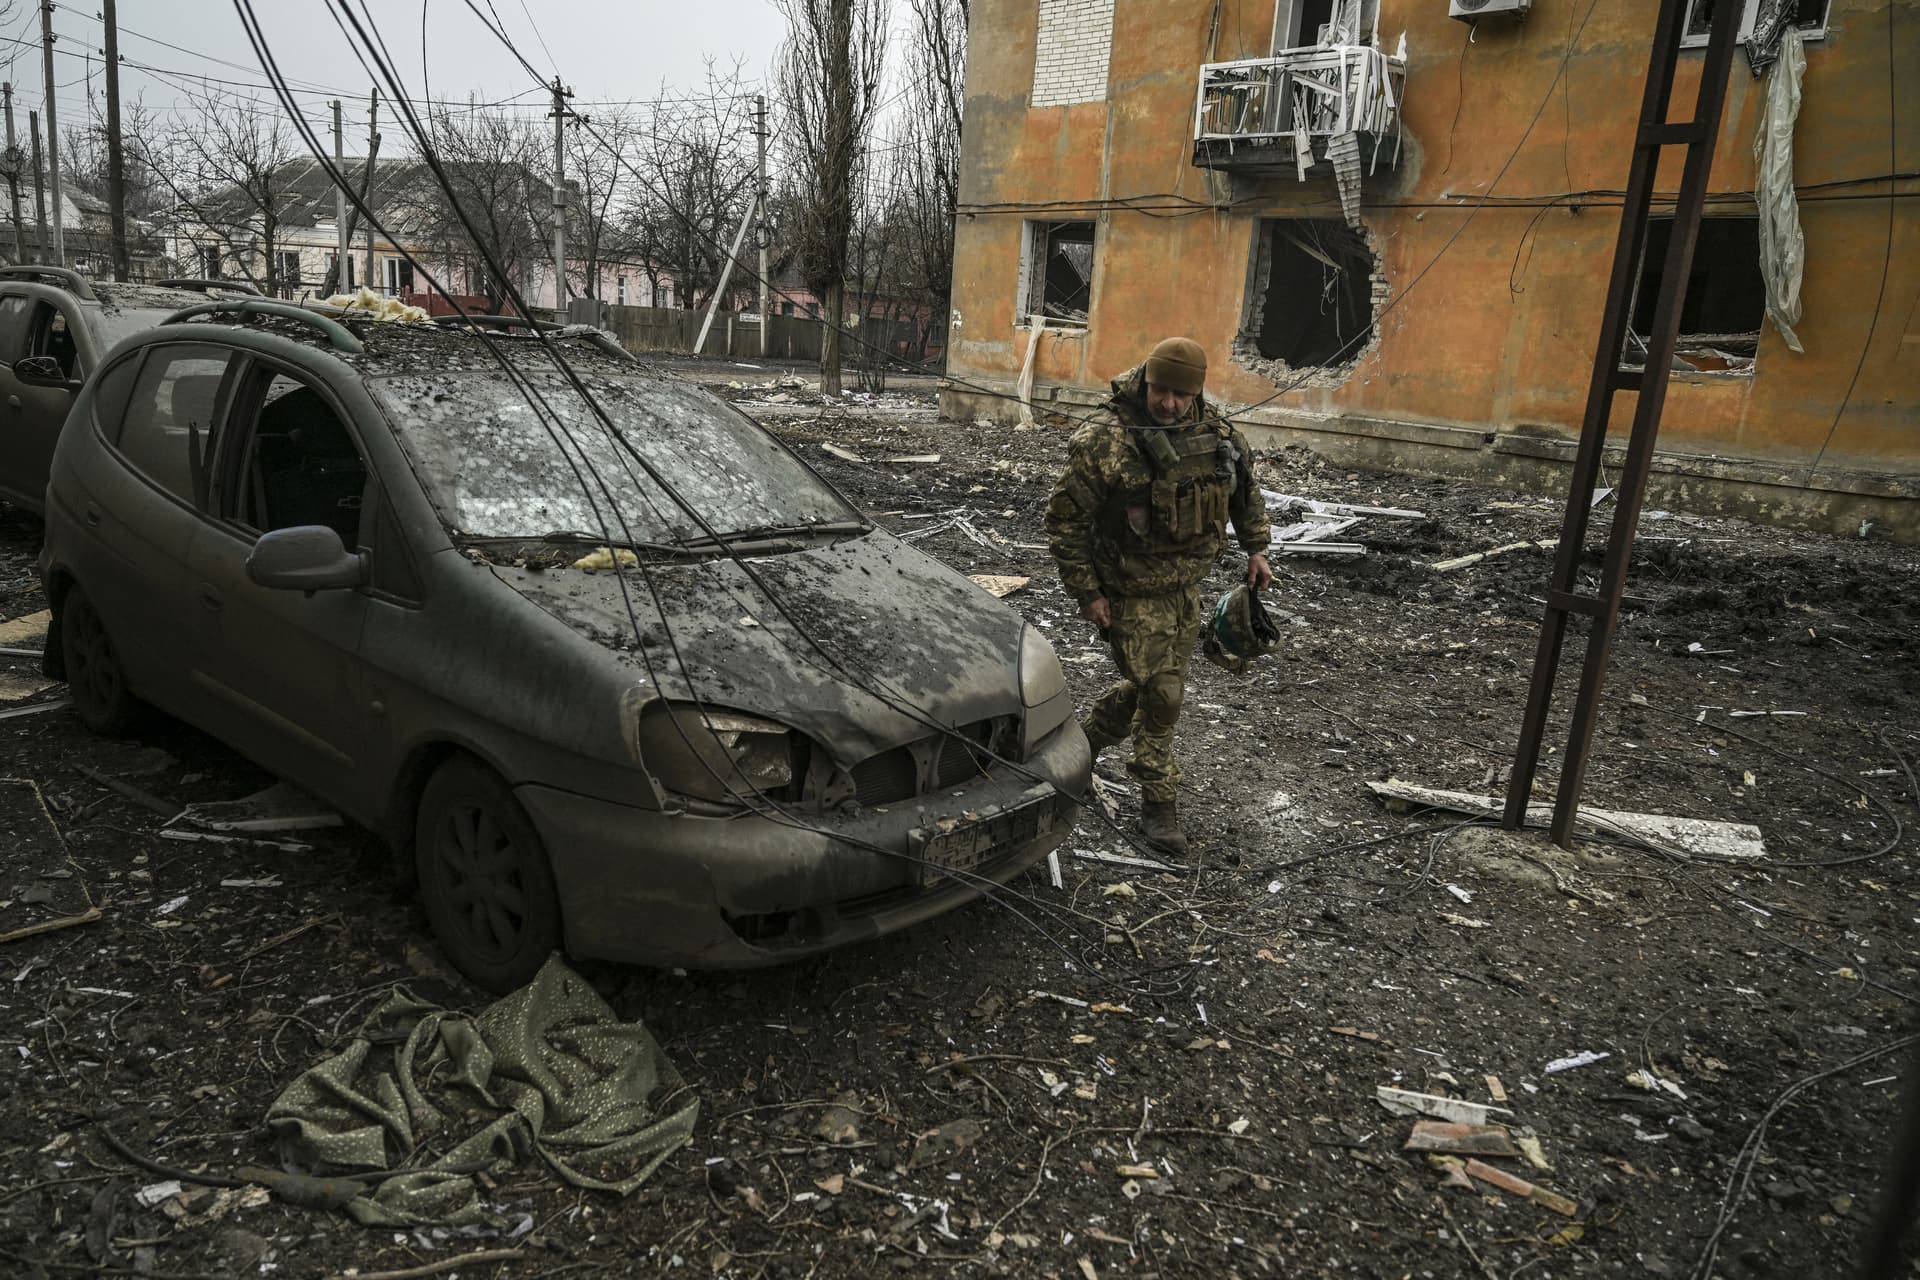 A Ukrainian service member looks at a damaged car after a shelling in the village of Chasiv Yar